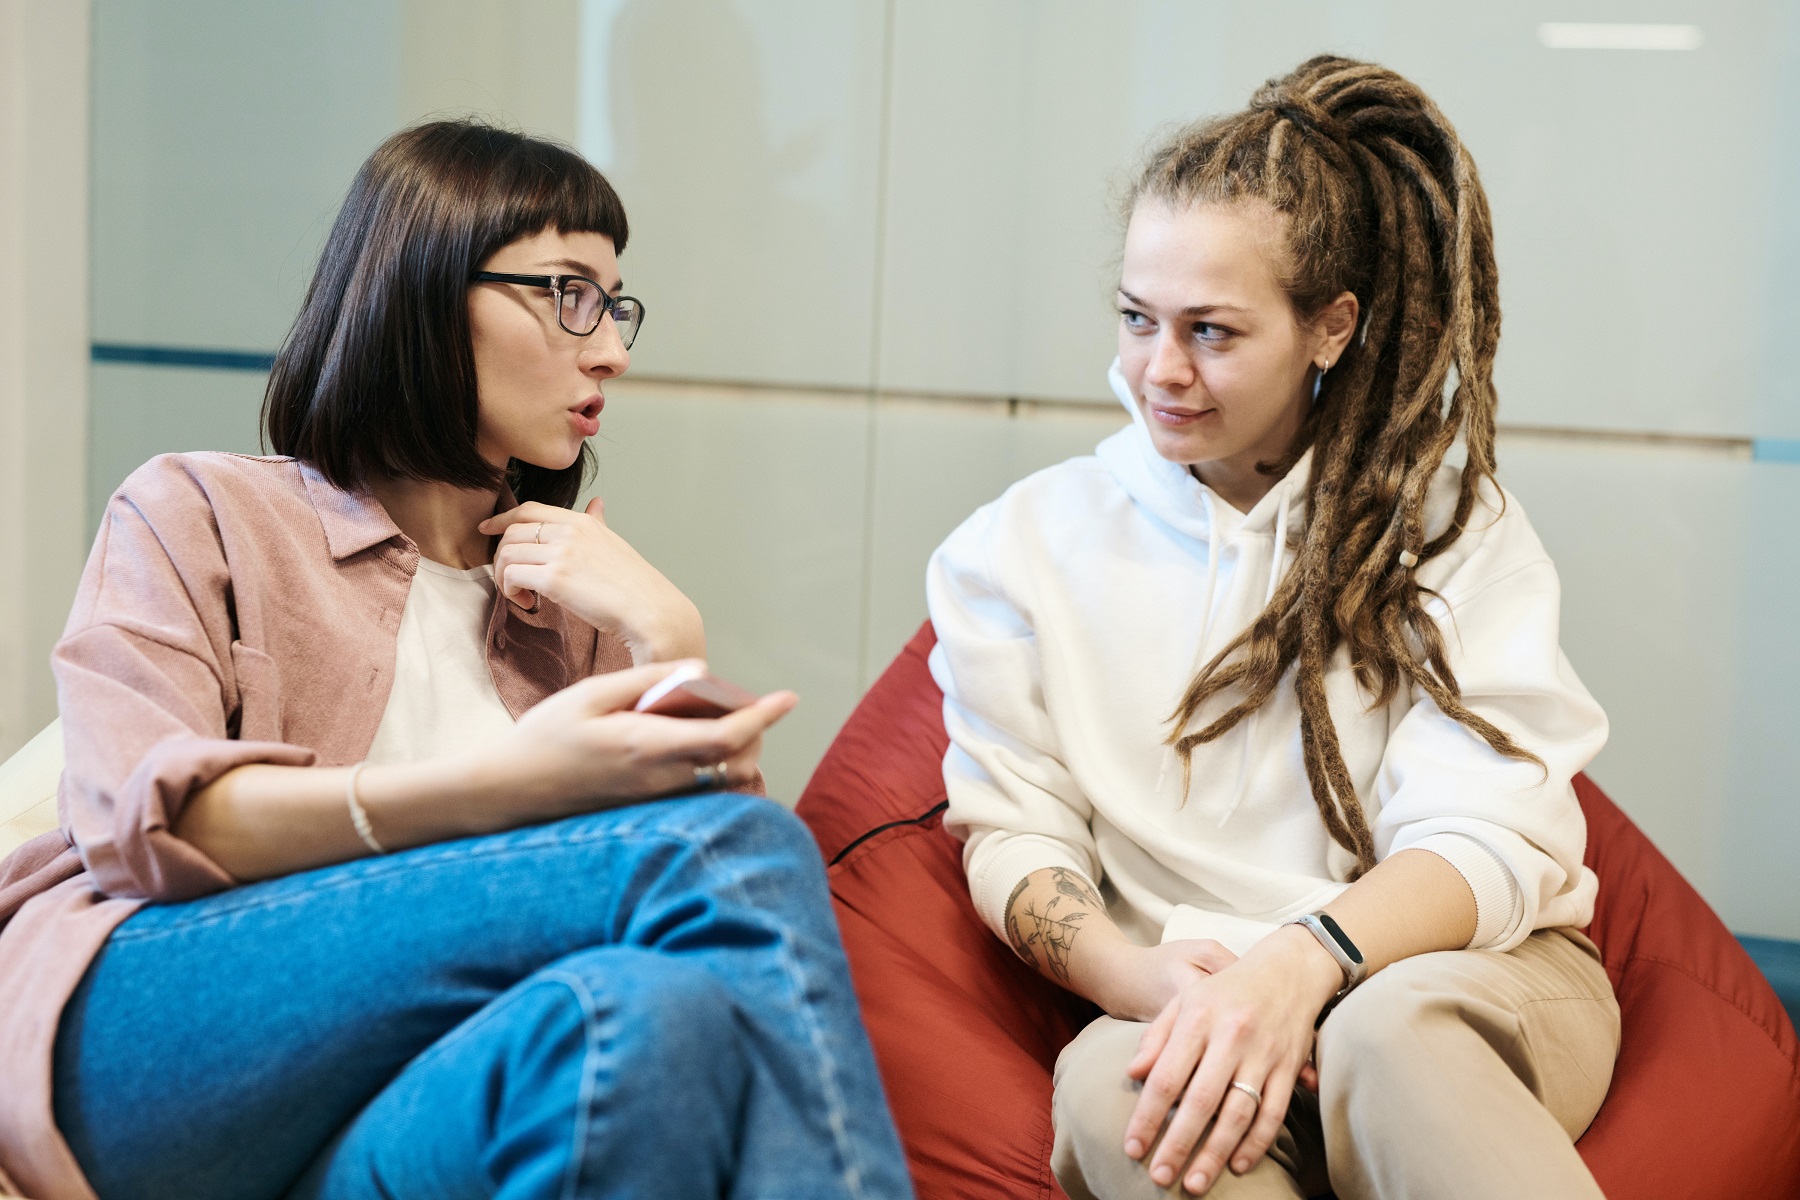 female teen conversing comfortably with female counselor